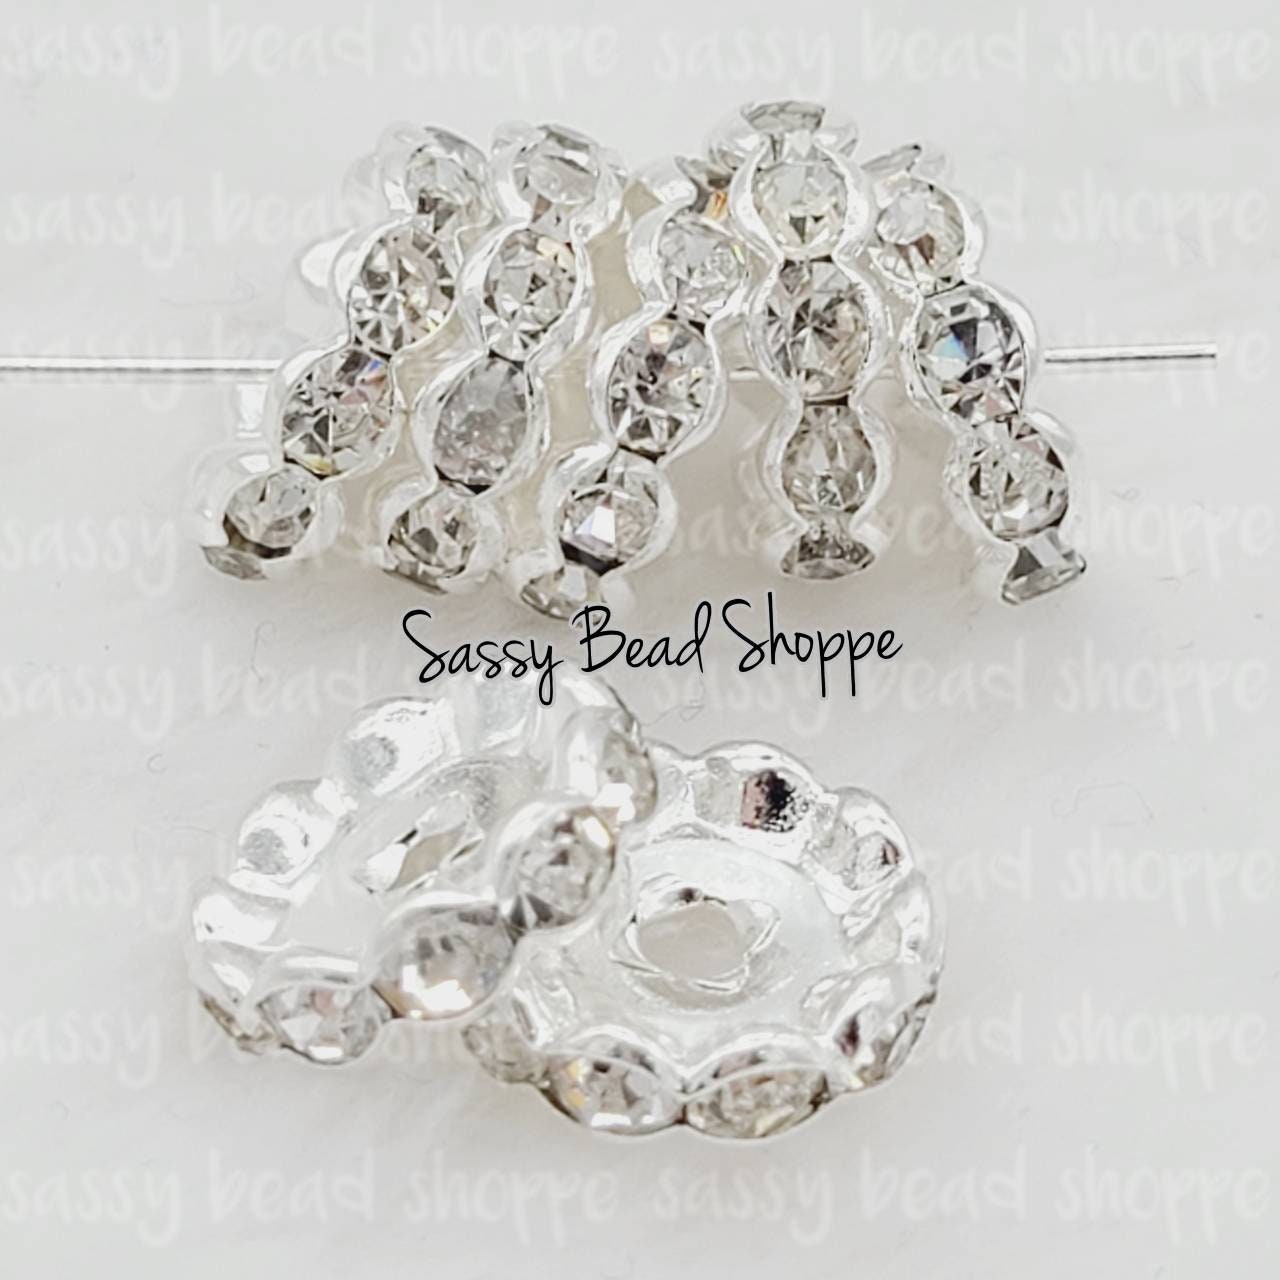 Clear Rhinestone & Silver Rondelle Beads (#BD008-P/CL)